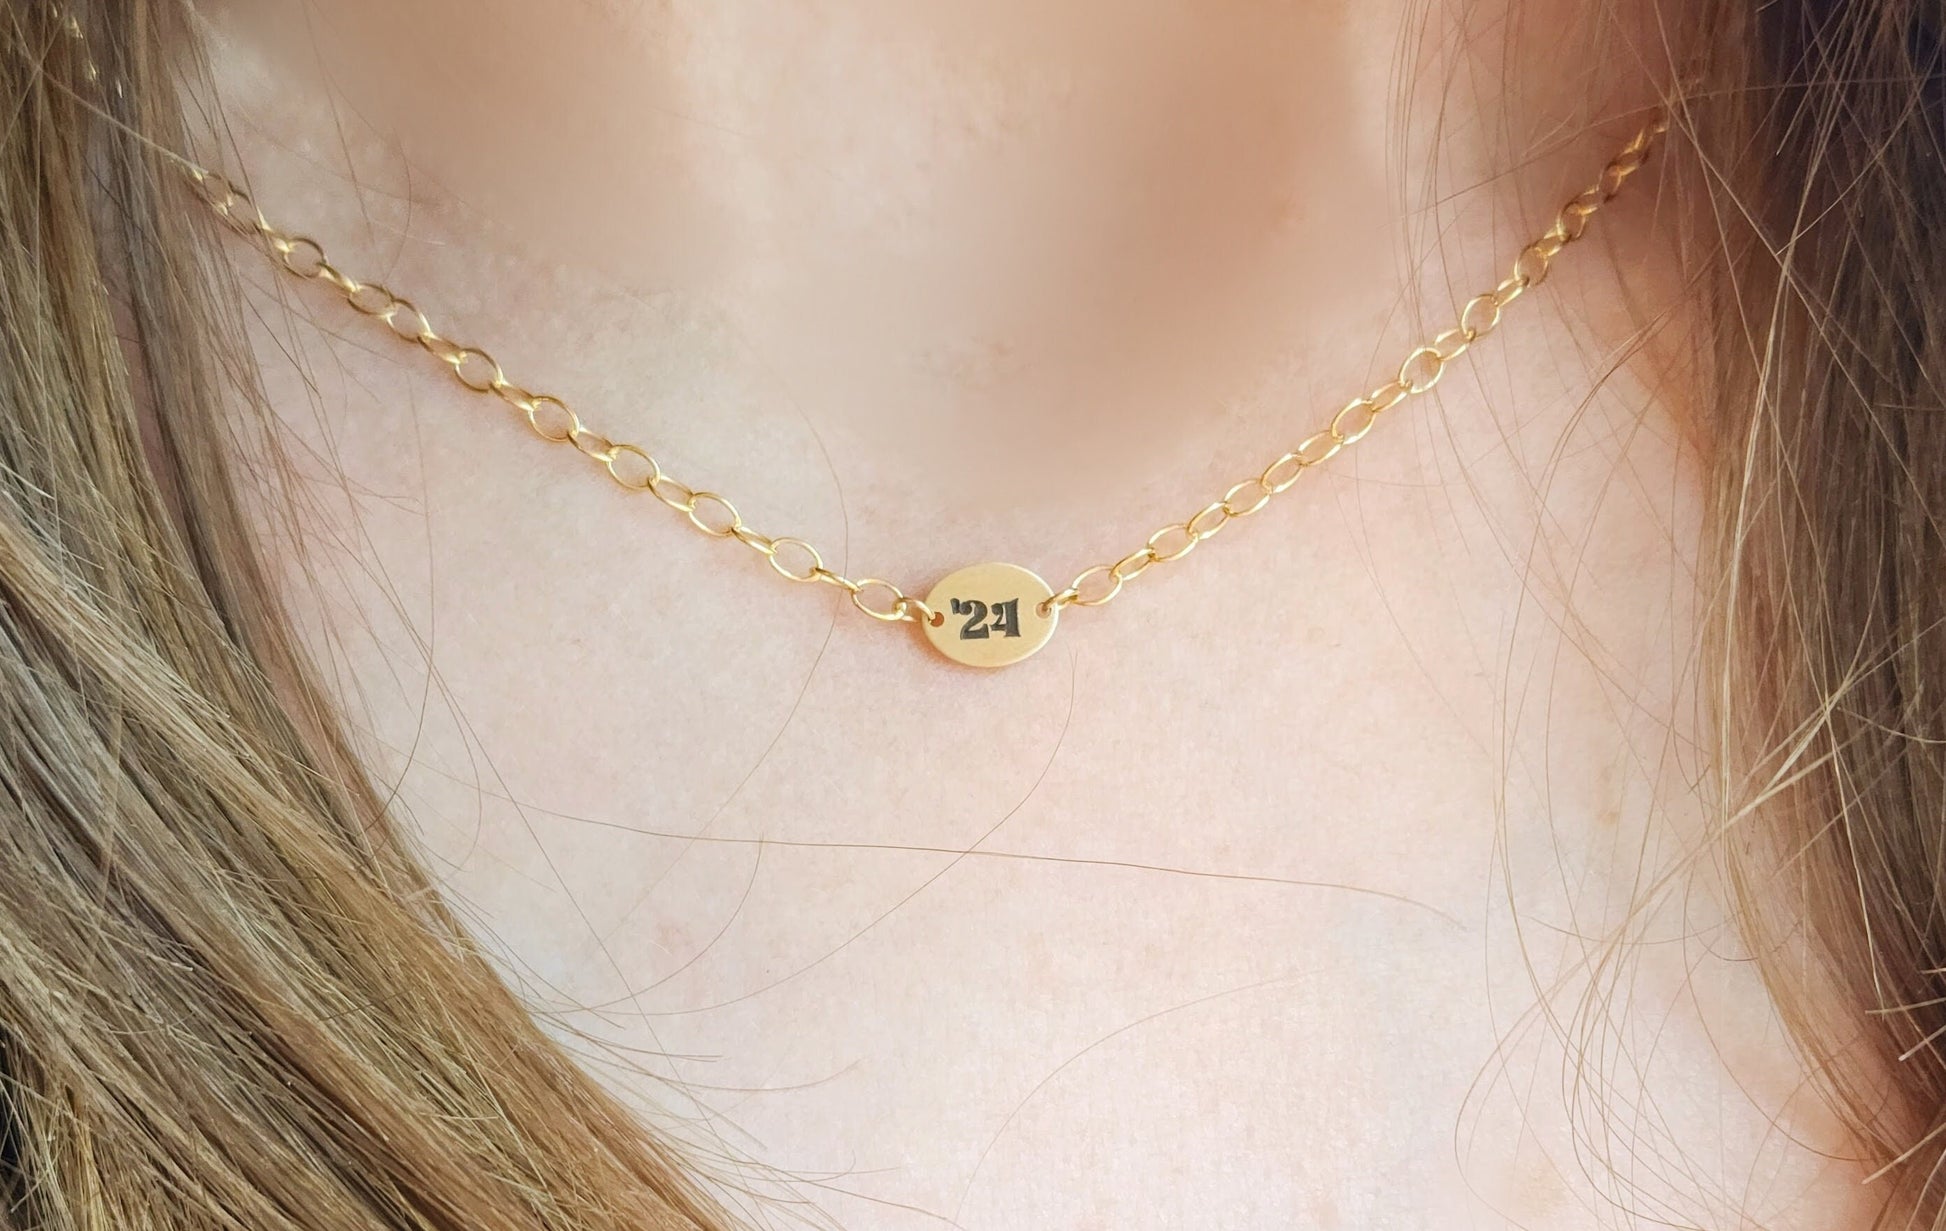 Favorite Year Necklace - Going Golden